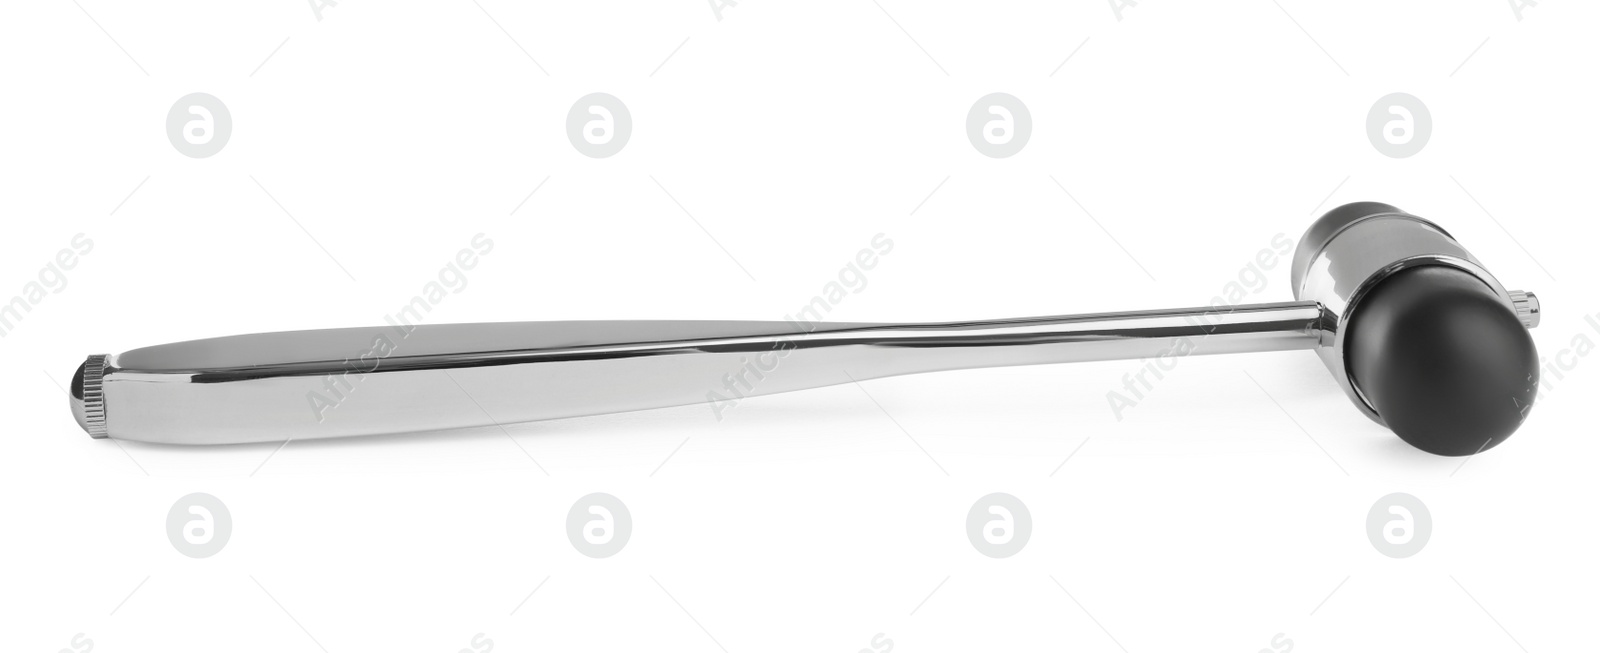 Photo of Reflex hammer isolated on white. Nervous system diagnostic